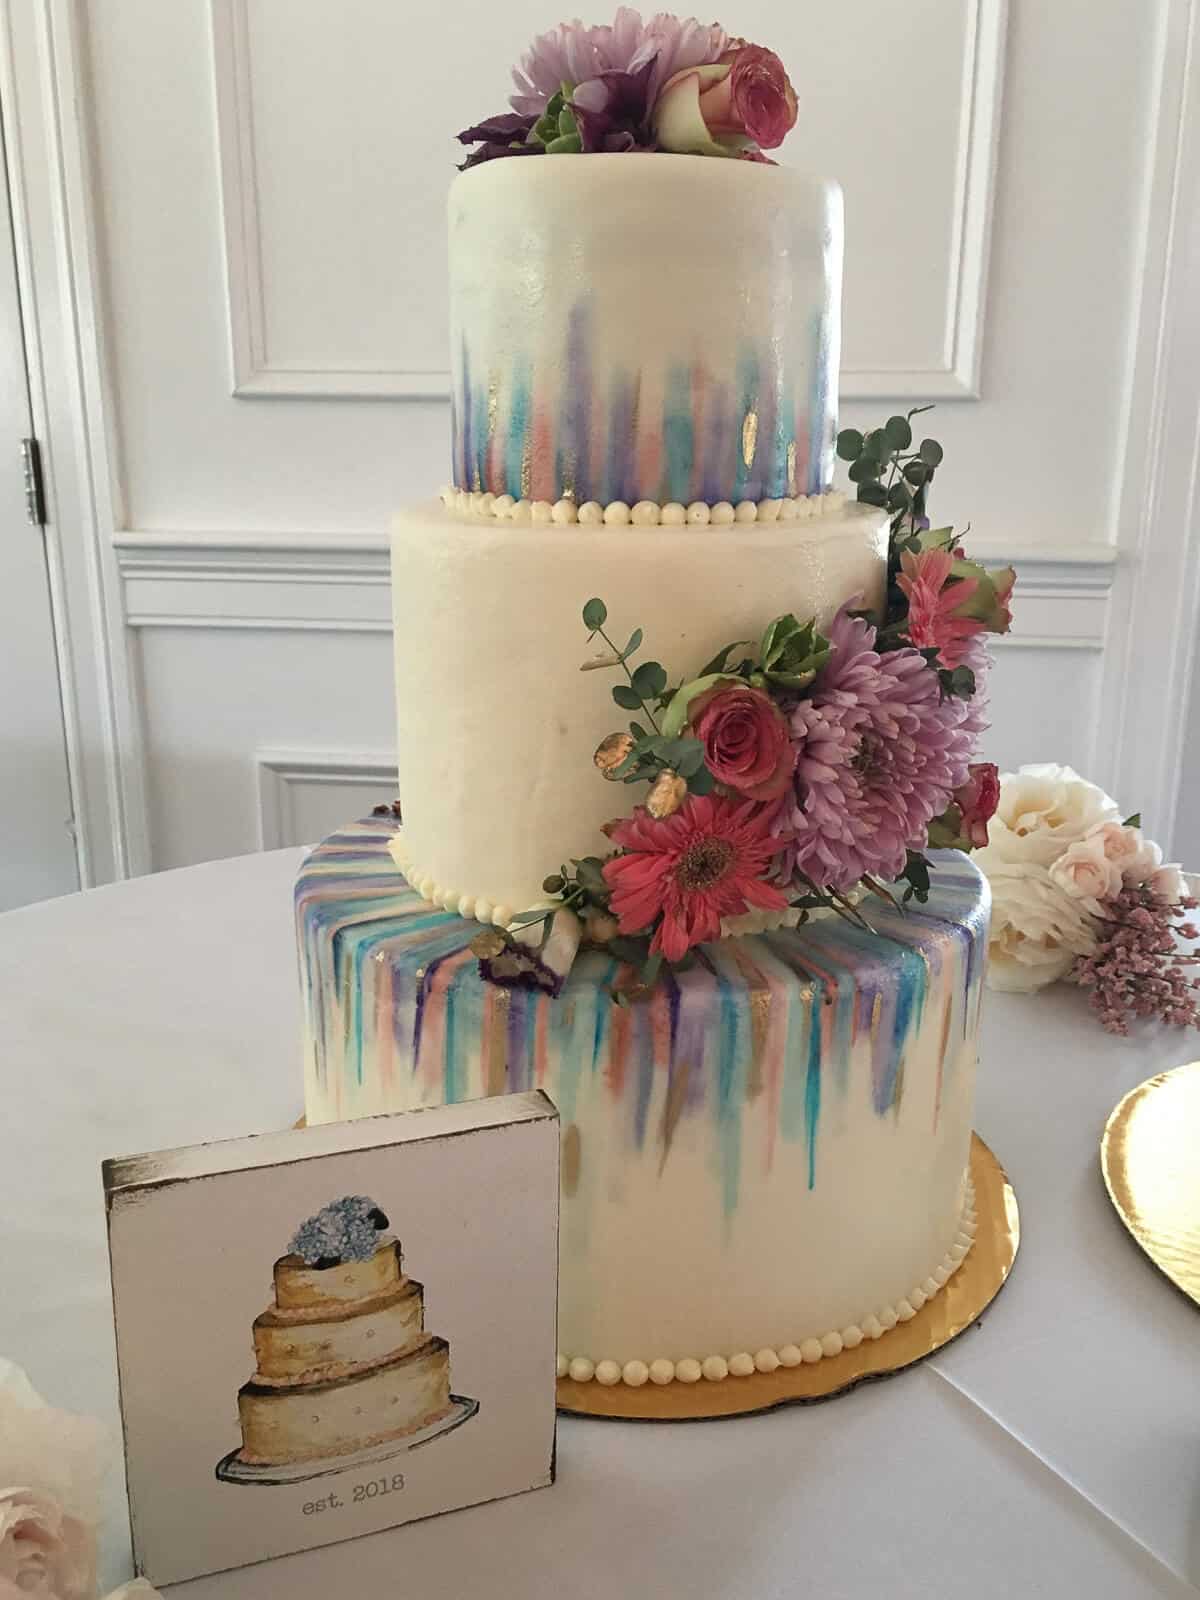 Finished wedding cake at the venue next to a small wedding cake sign.